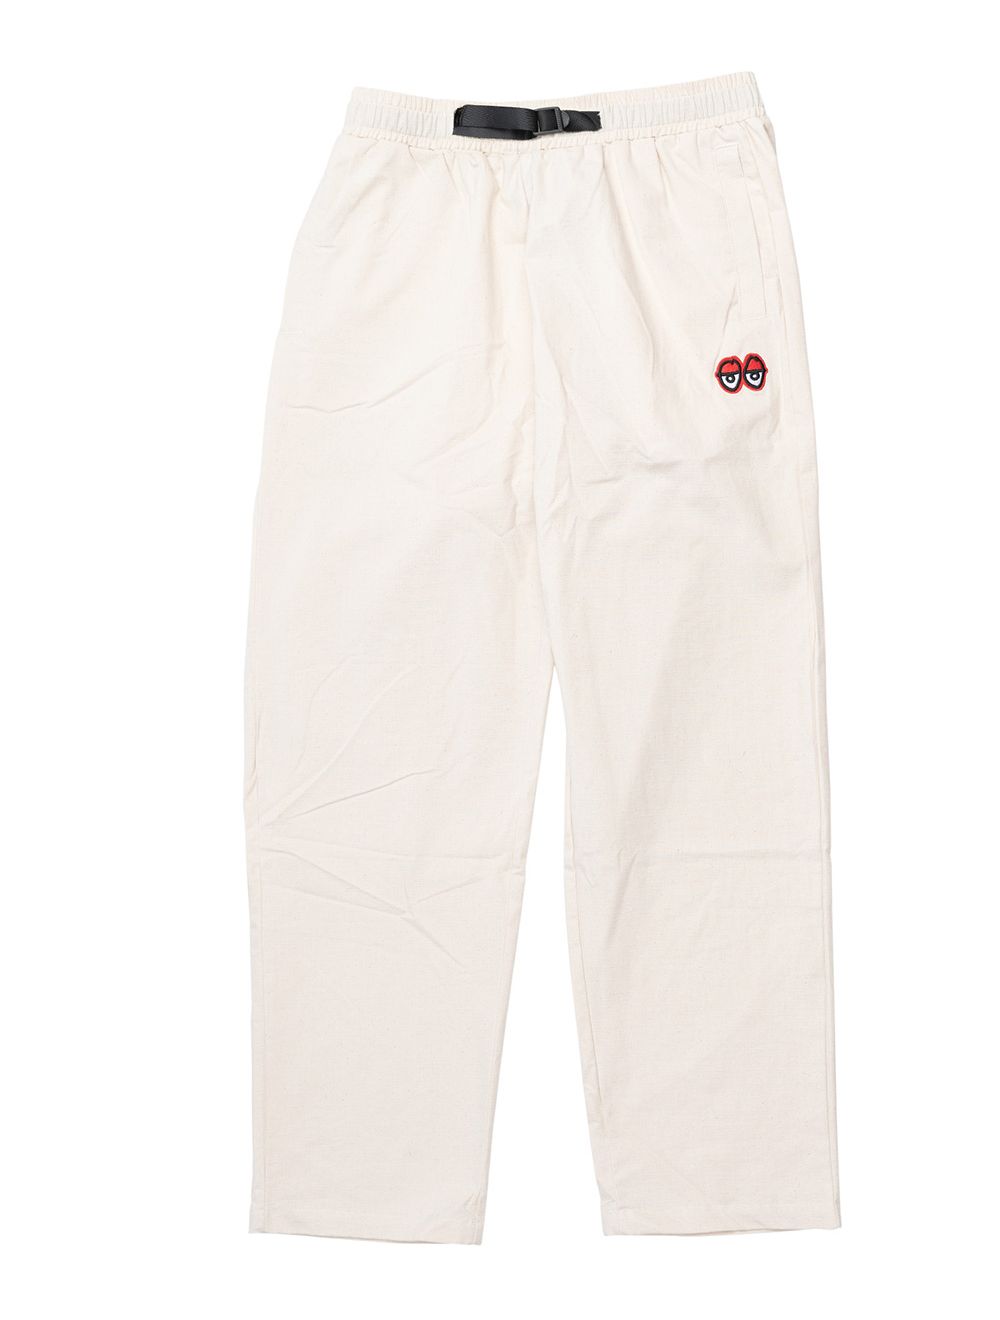 Krooked. Eyes Ripstop Pant. Ecru W/ Red Embroidery.